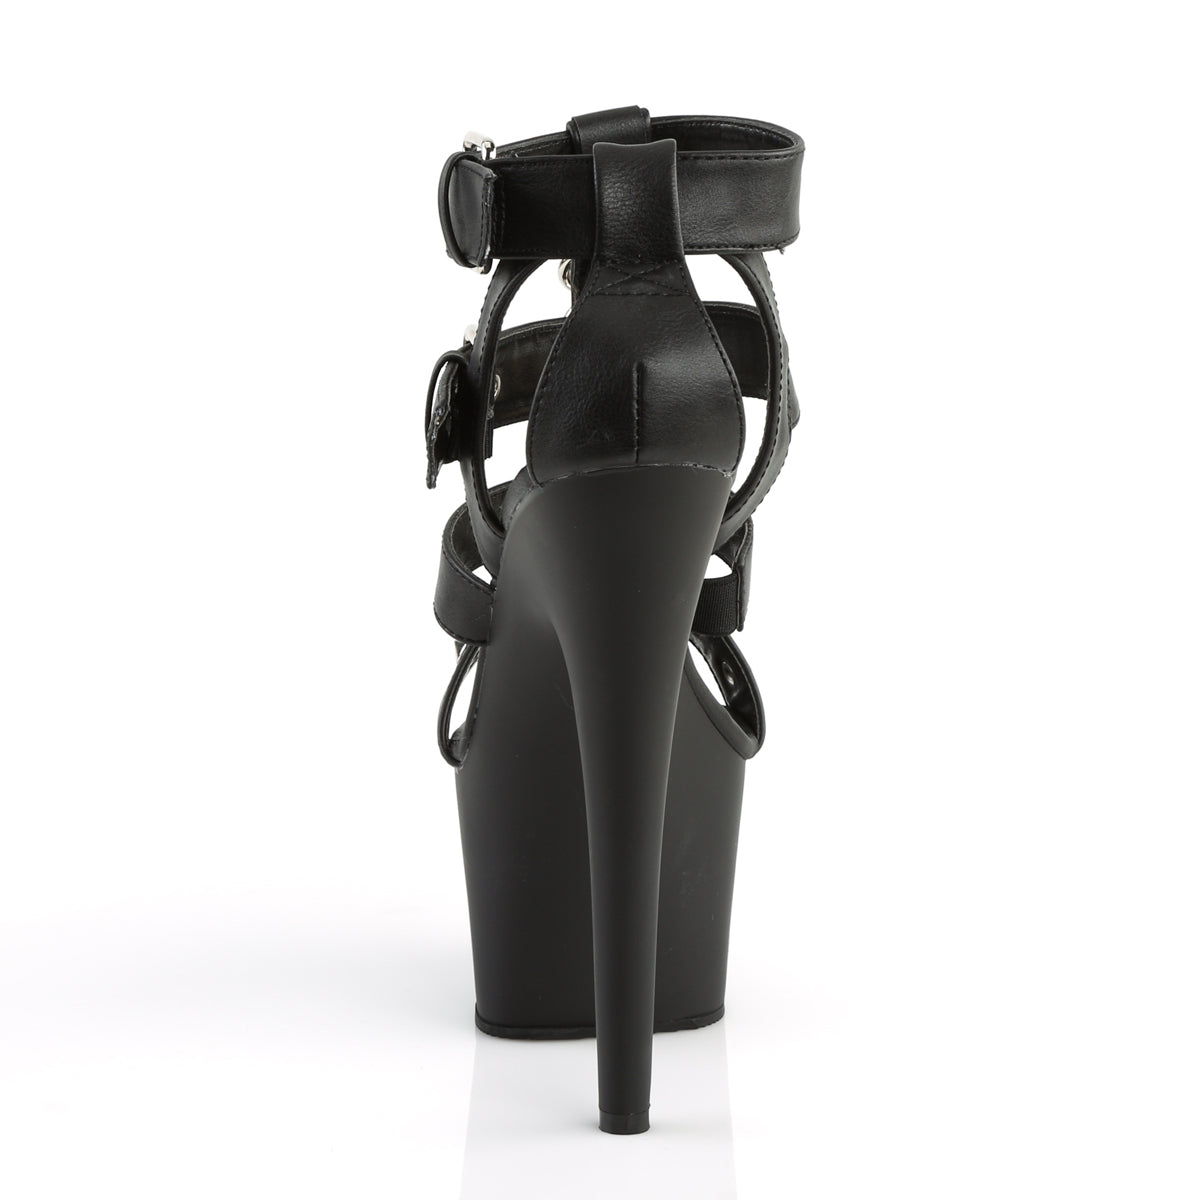 ADORE-758 Pleaser 7 Inch Heel Black Strippers Sandals-Pleaser- Sexy Shoes Fetish Footwear